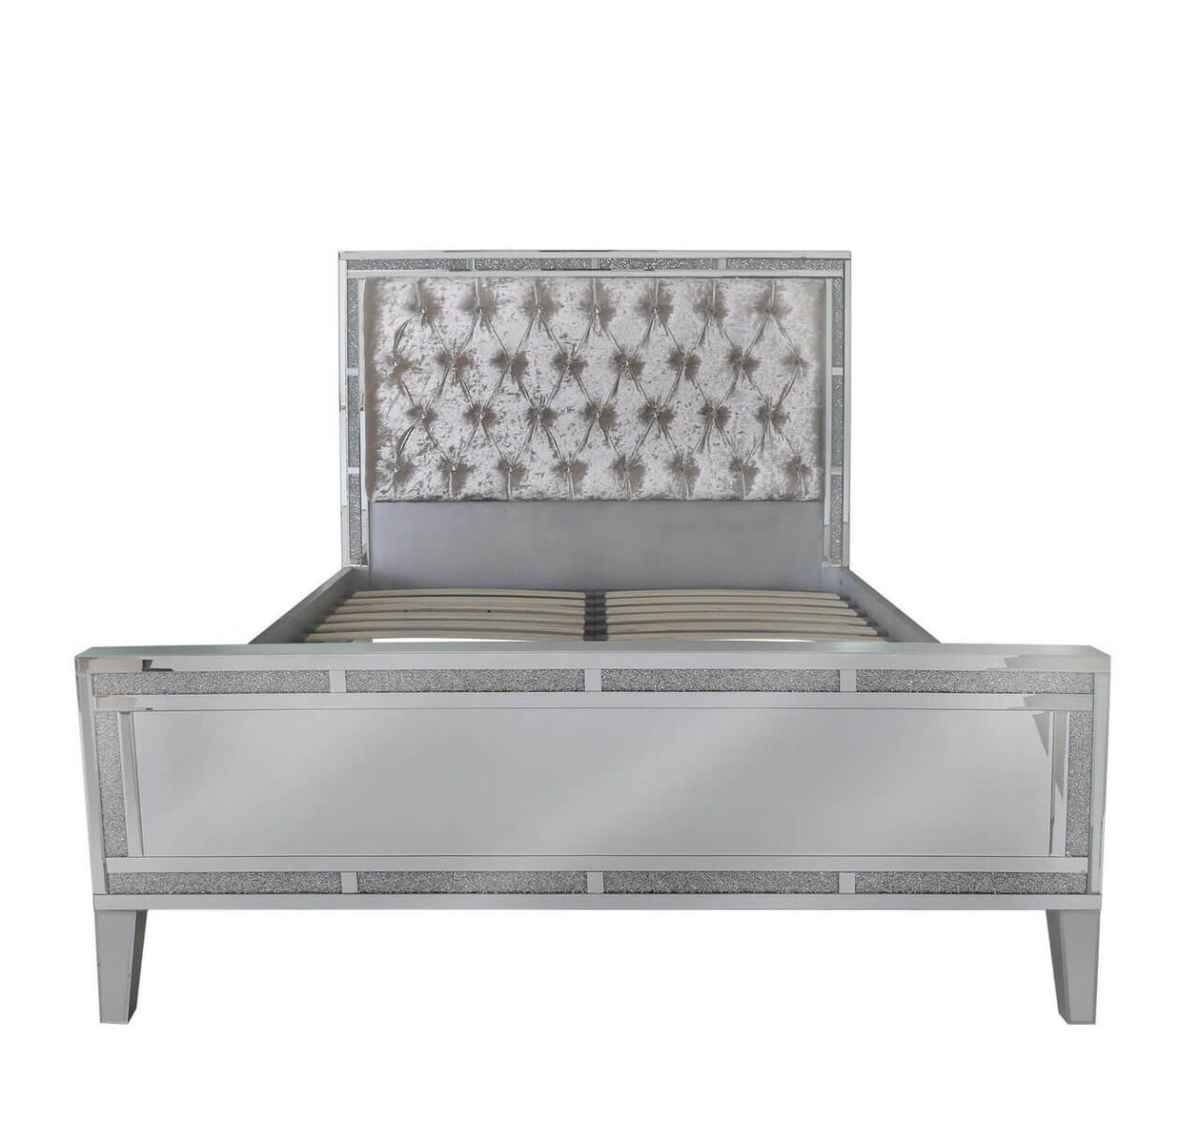 Glitz Crushed Crystals Venetian Mirrored King Size Bed Frame